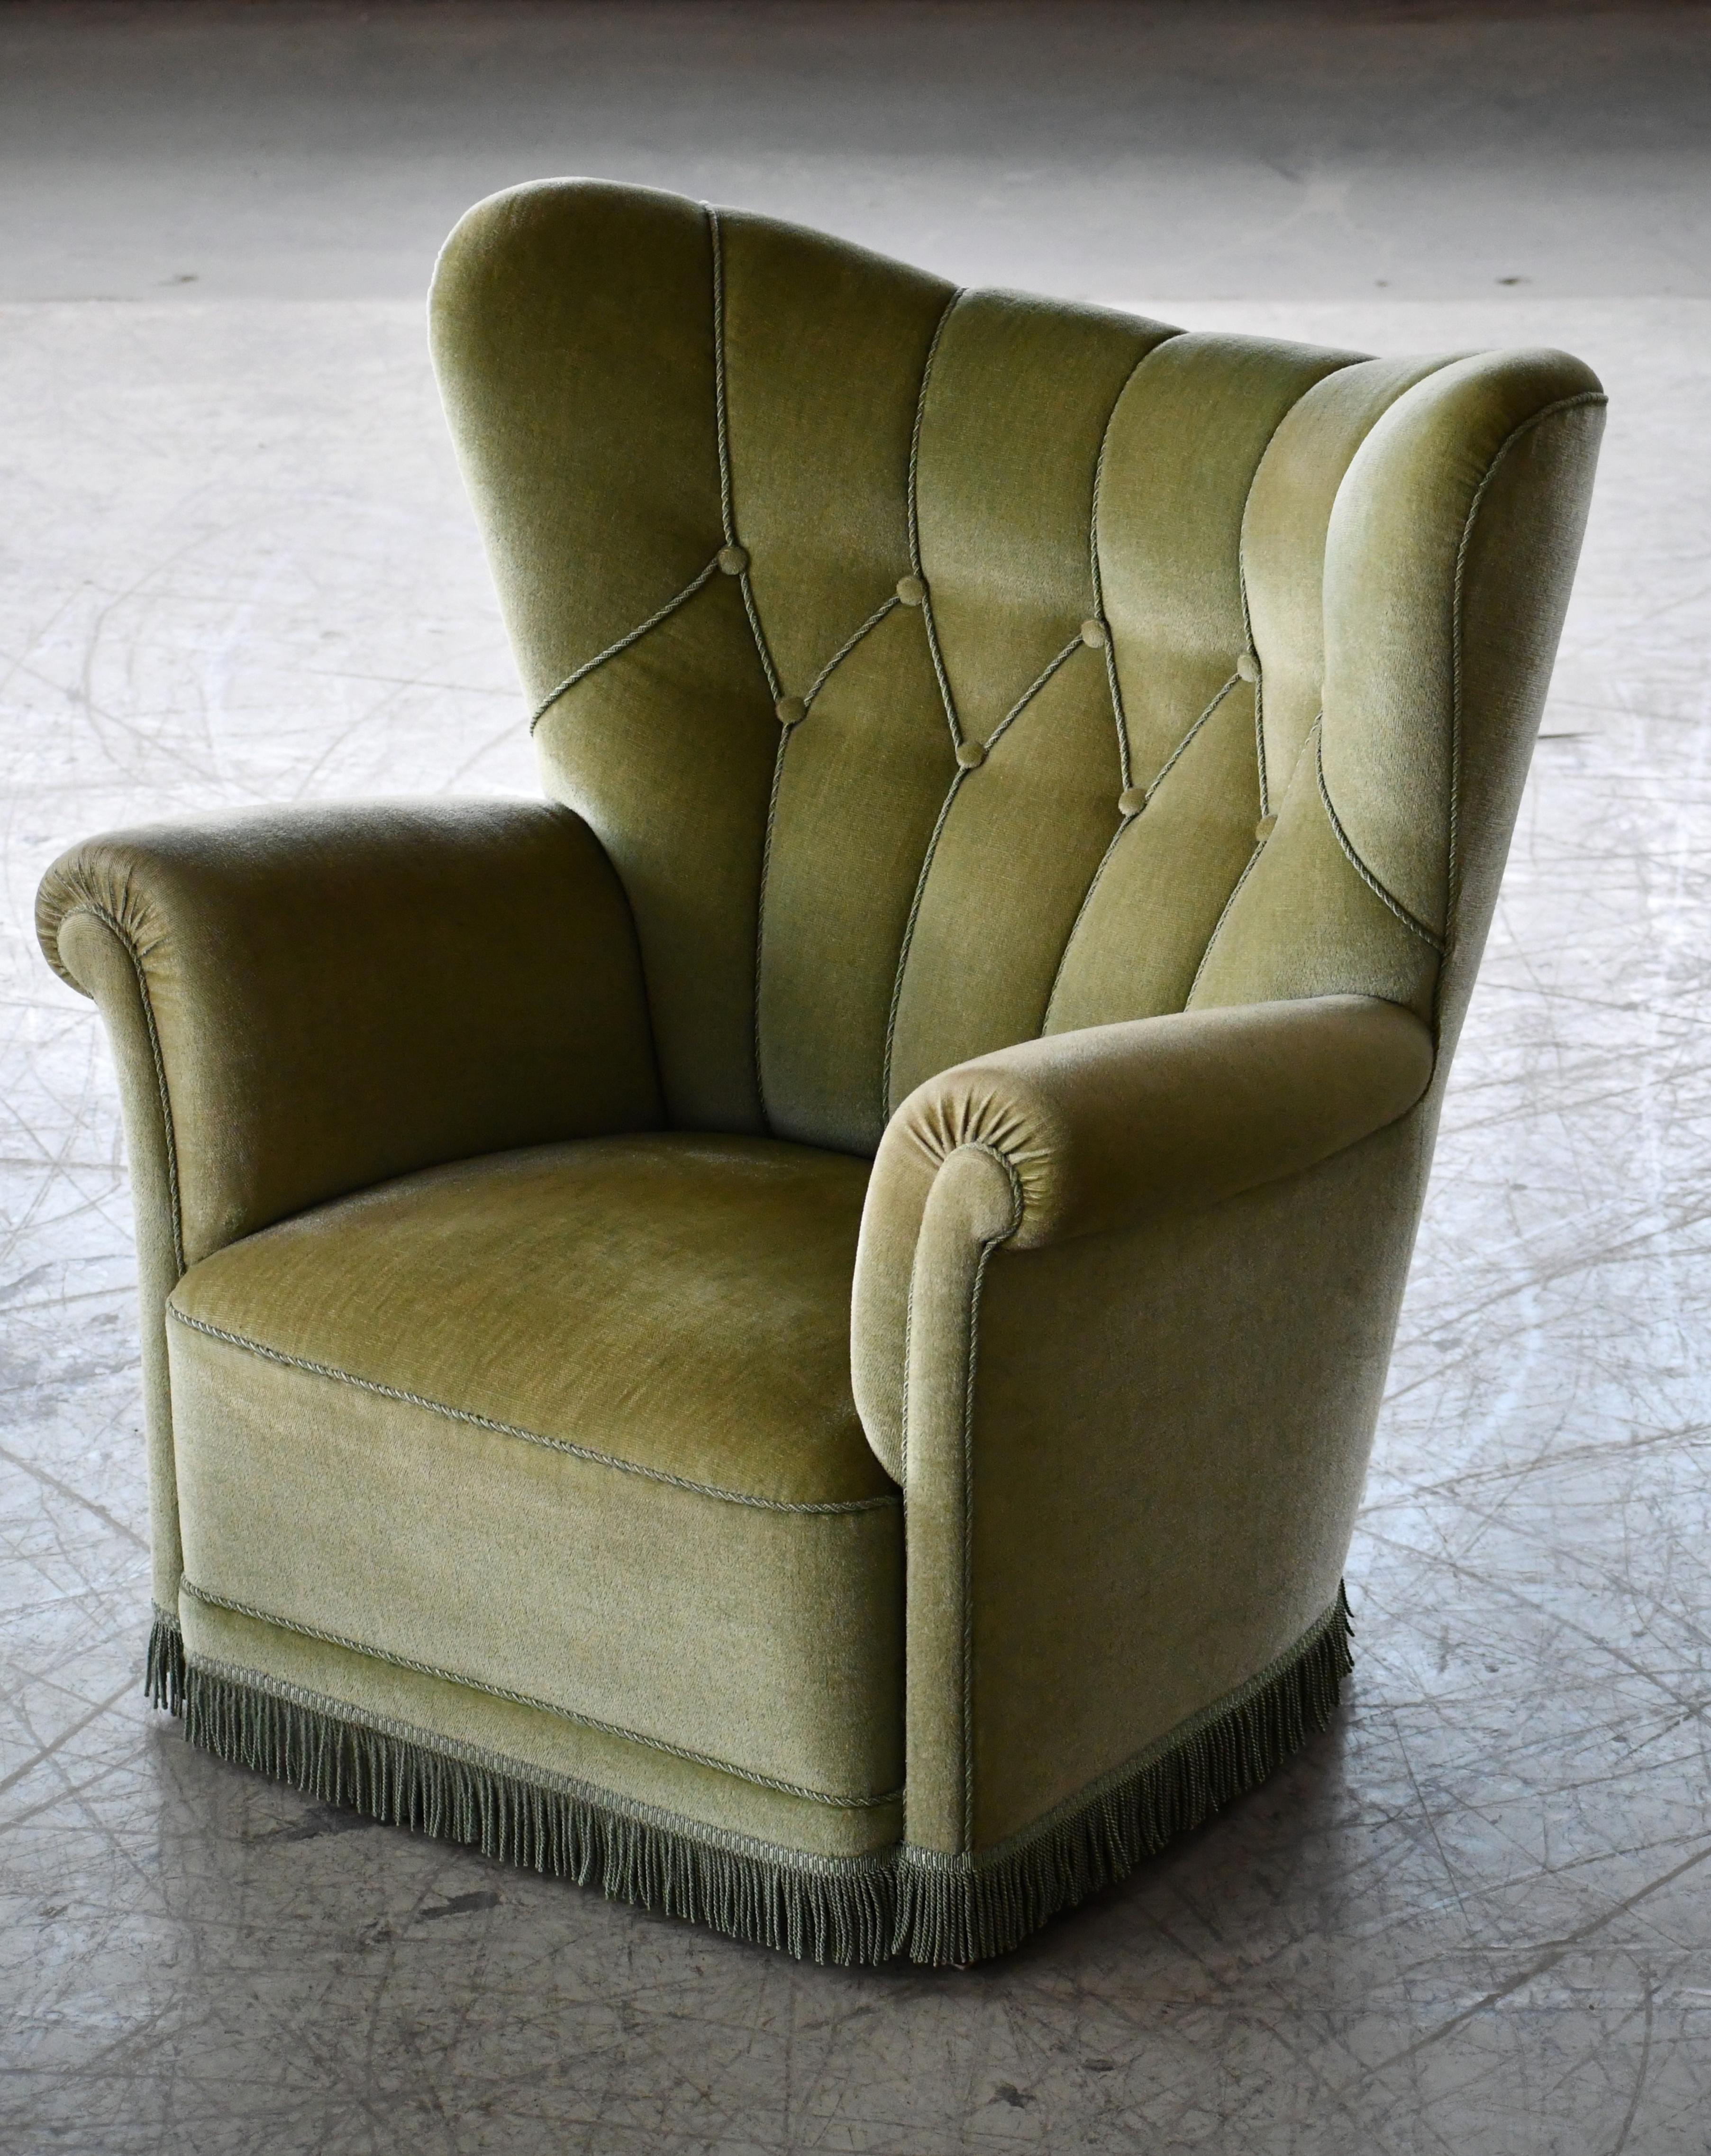 Danish Mid-Century Lounge or Club Chair in Green Mohair, 1940's For Sale 6